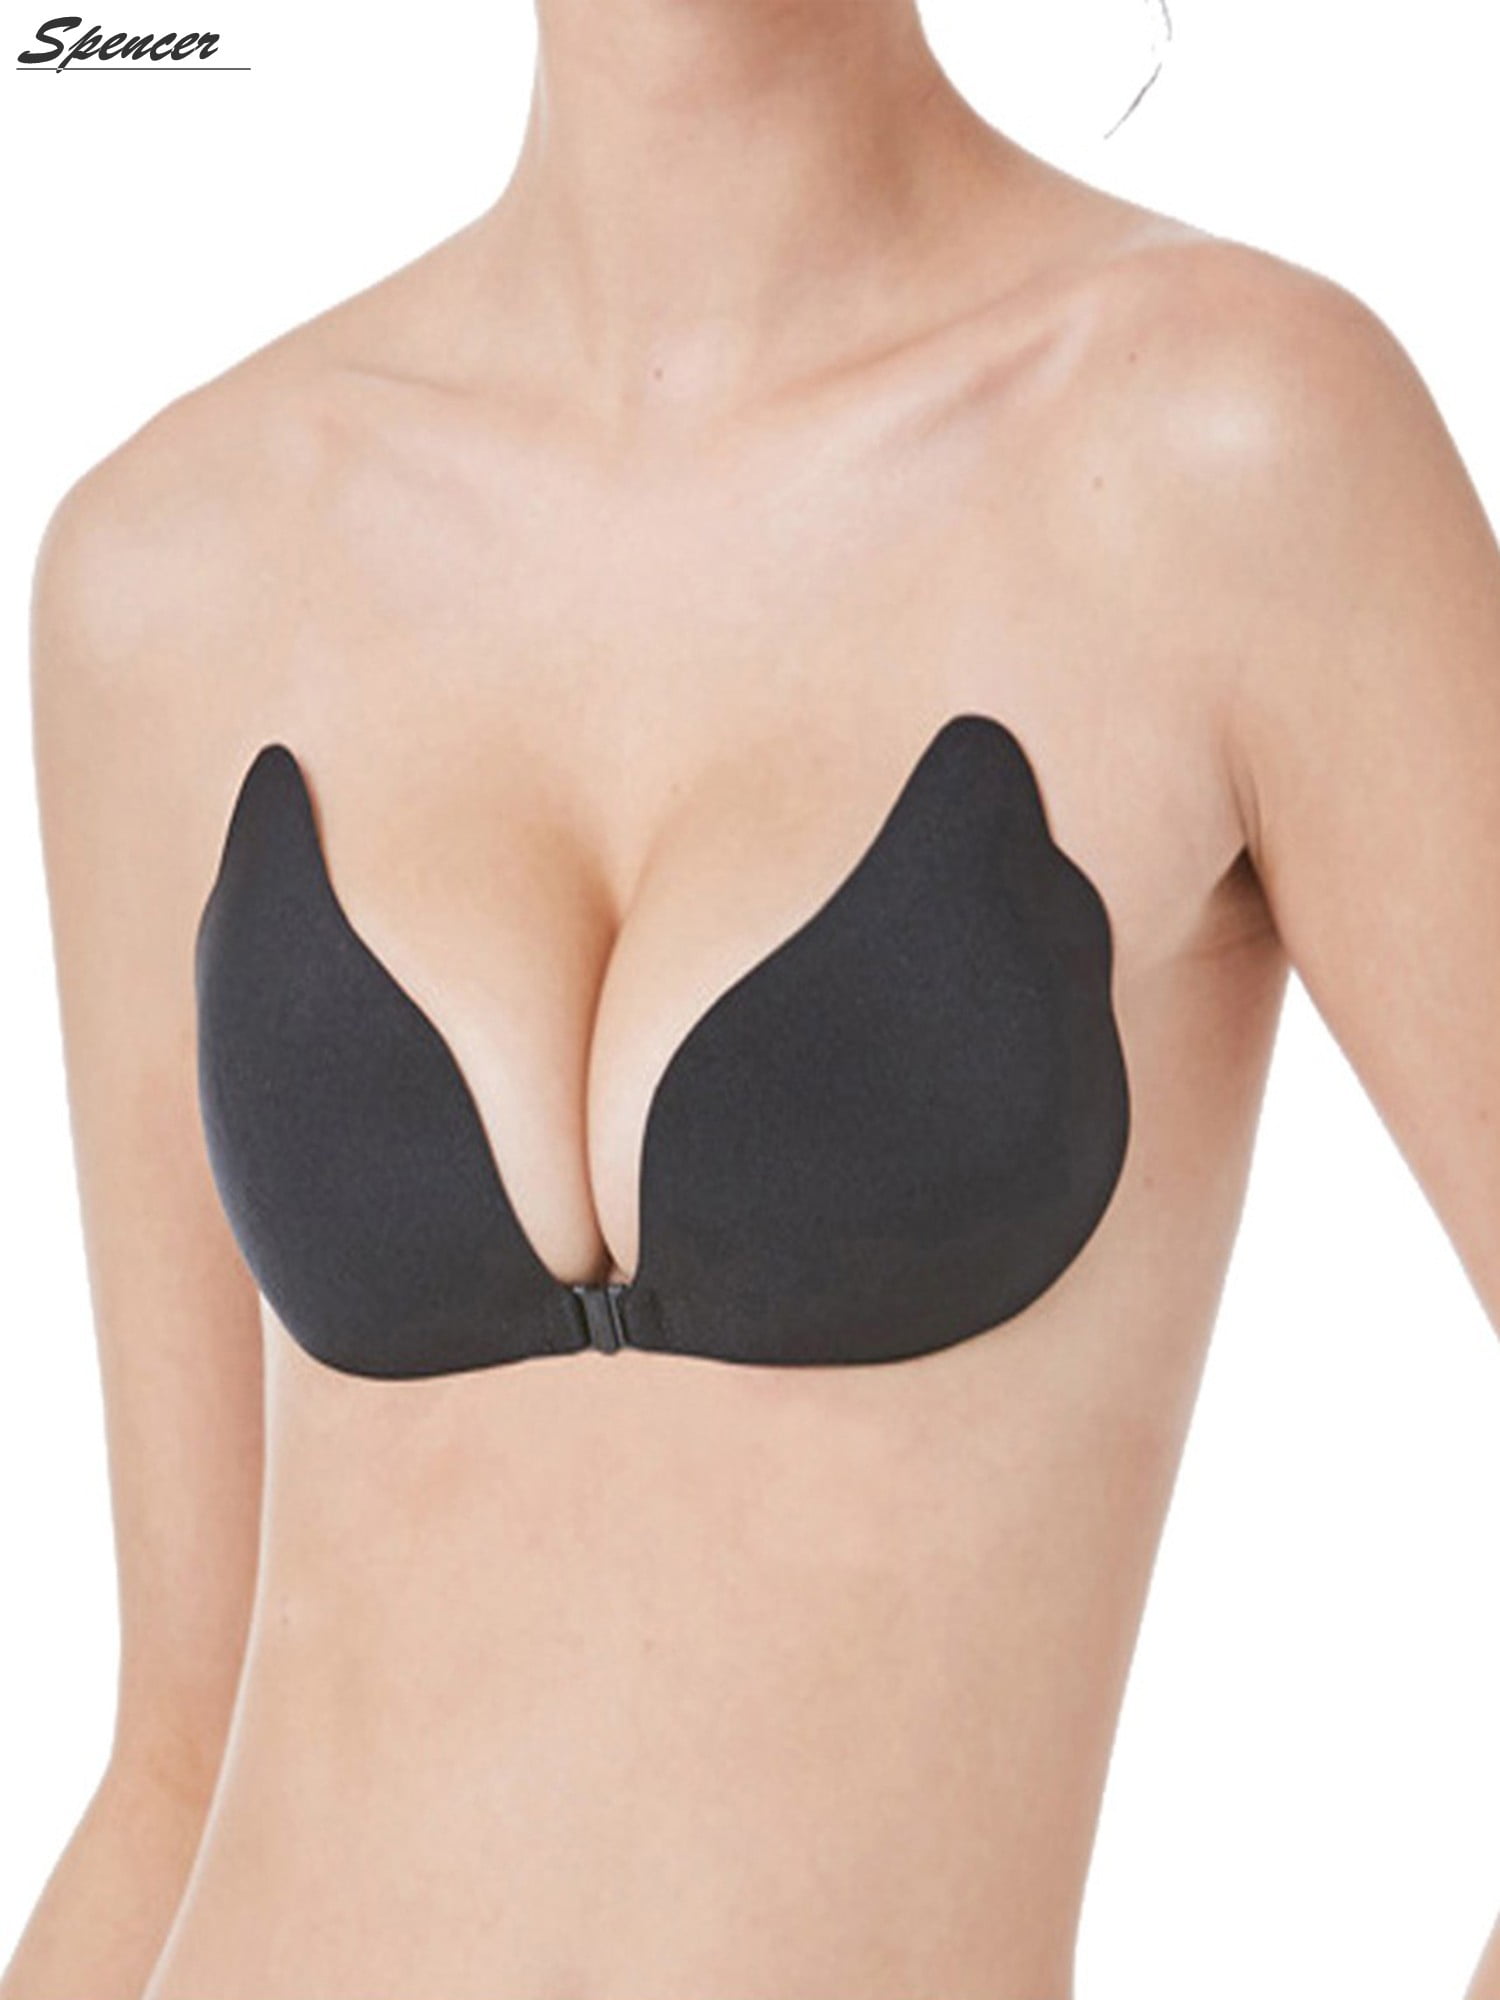 VANILLAFUDGE Women's Silicone Adhesive Stick-on Push Up Strapless Invisible  Backless Bra (Skin) bra |bra for women |without strap bra |bras